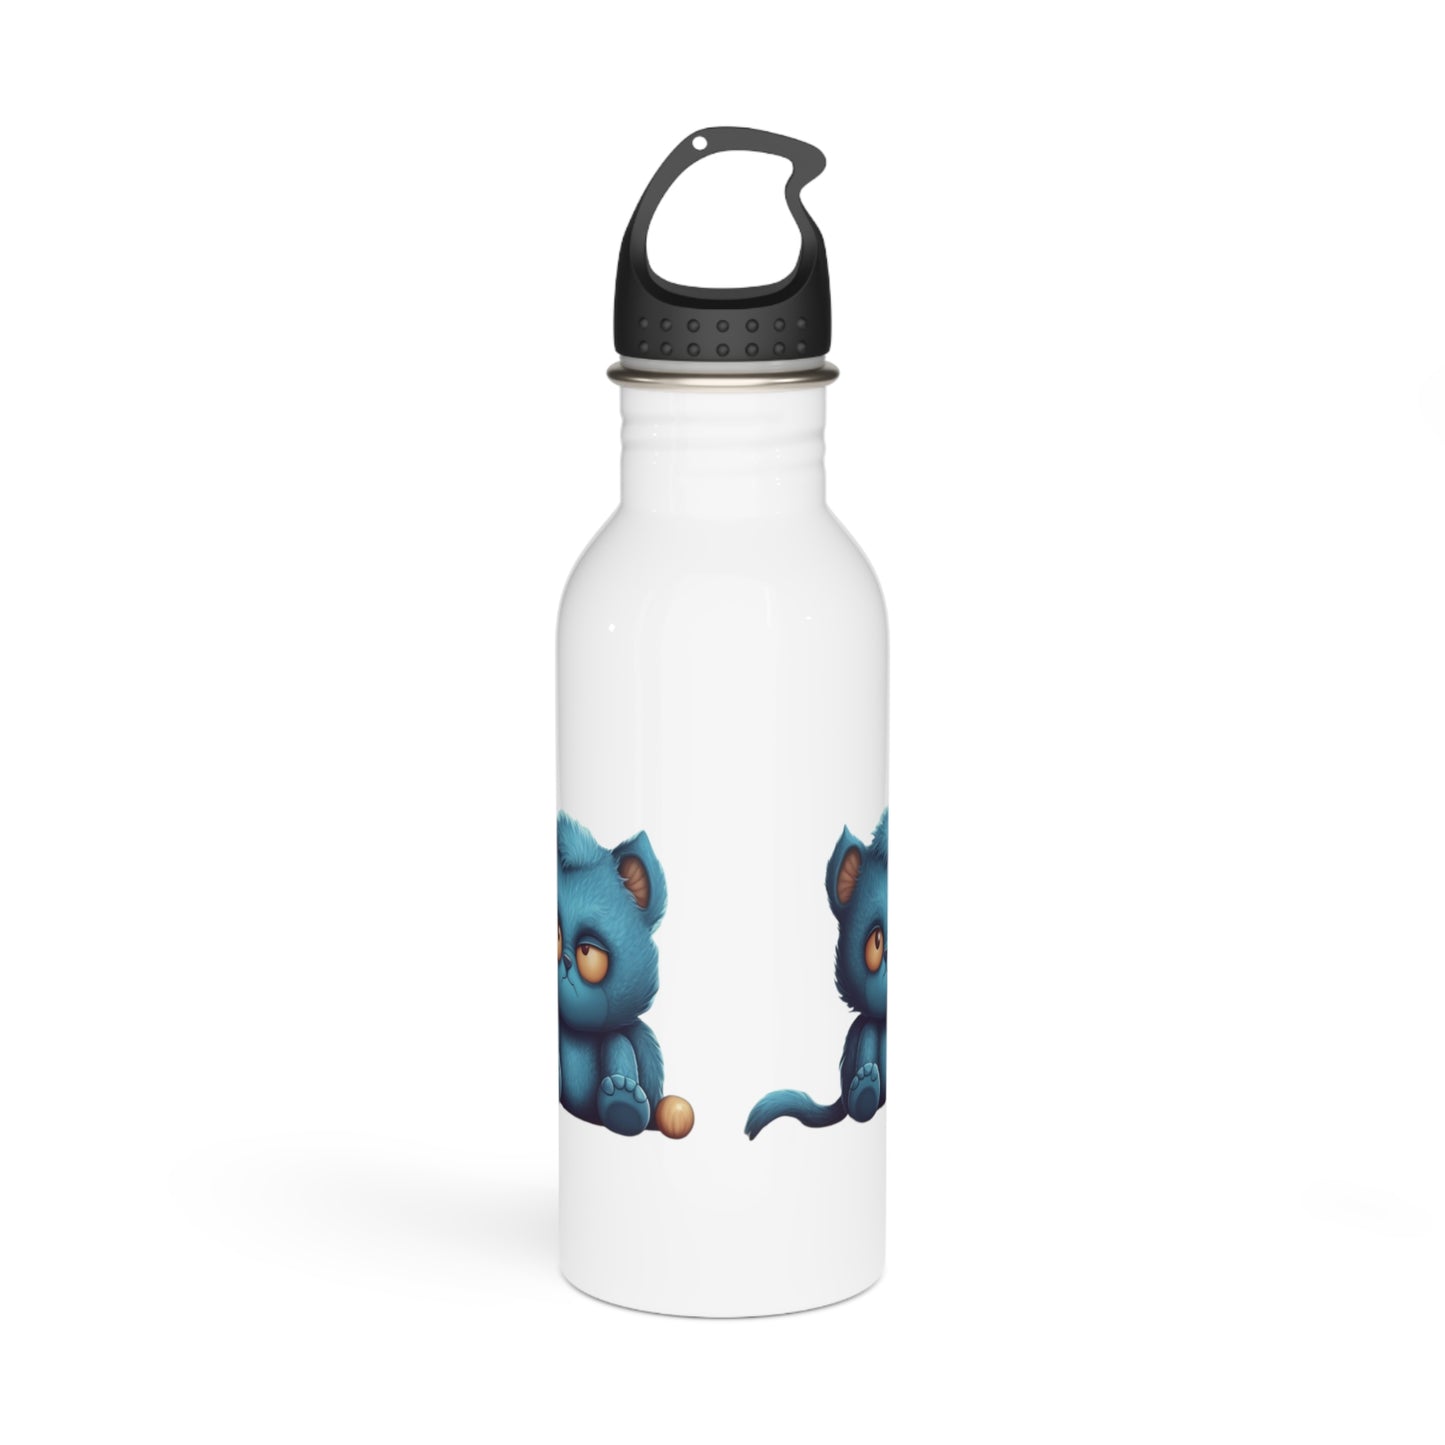 Empowering Stainless Steel Water Bottle - Fuck Depression